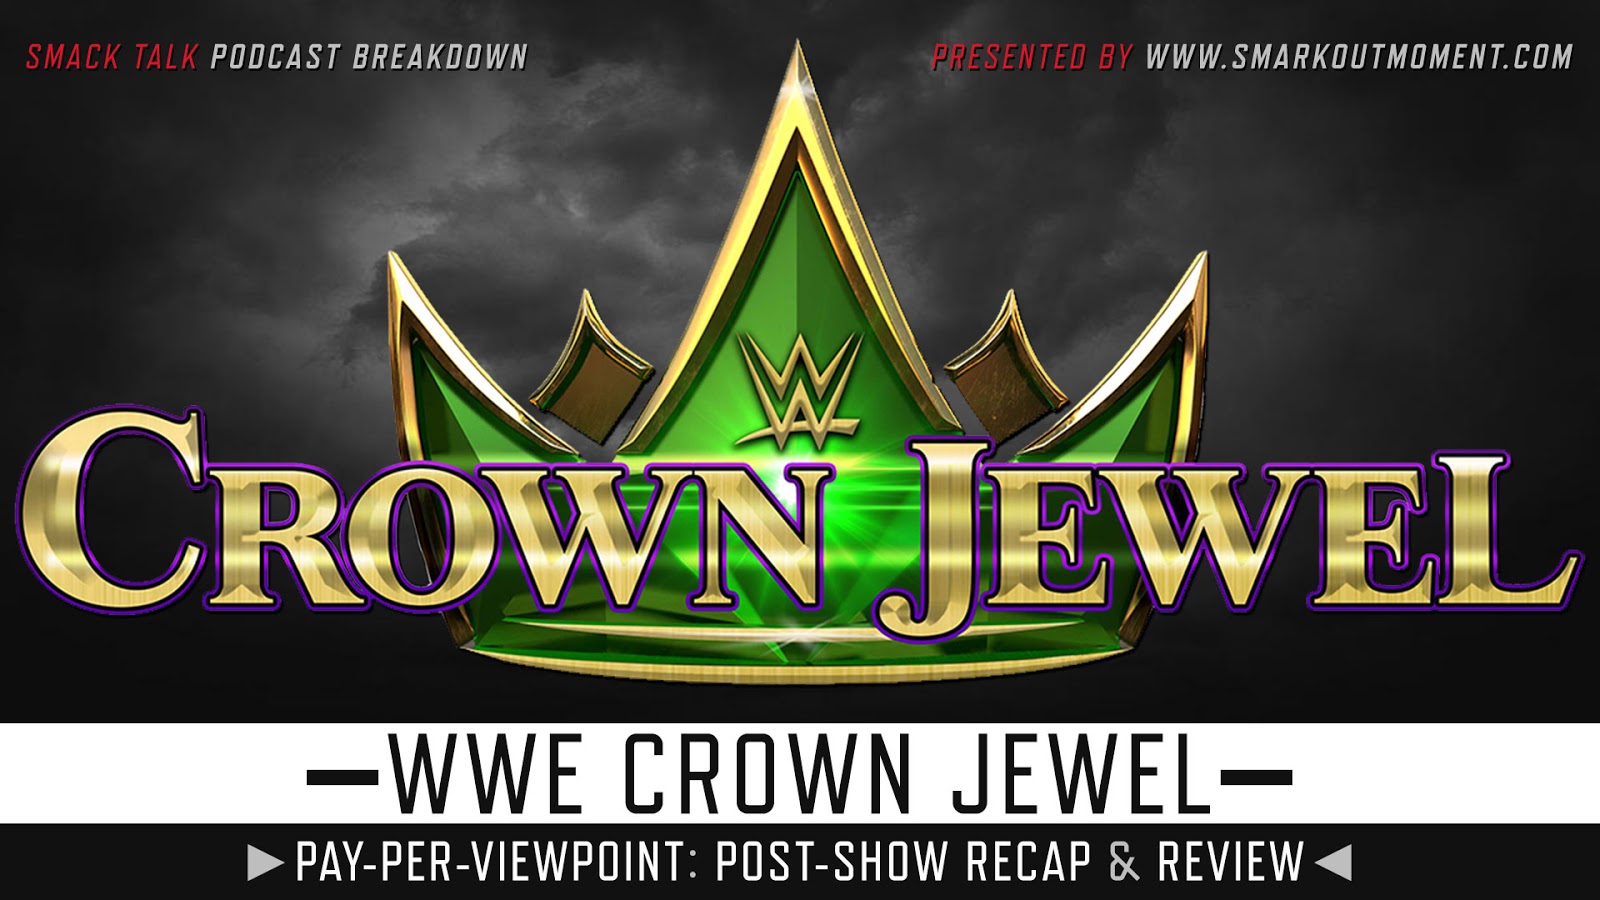 WWE Crown Jewel 2019 Recap and Review Podcast